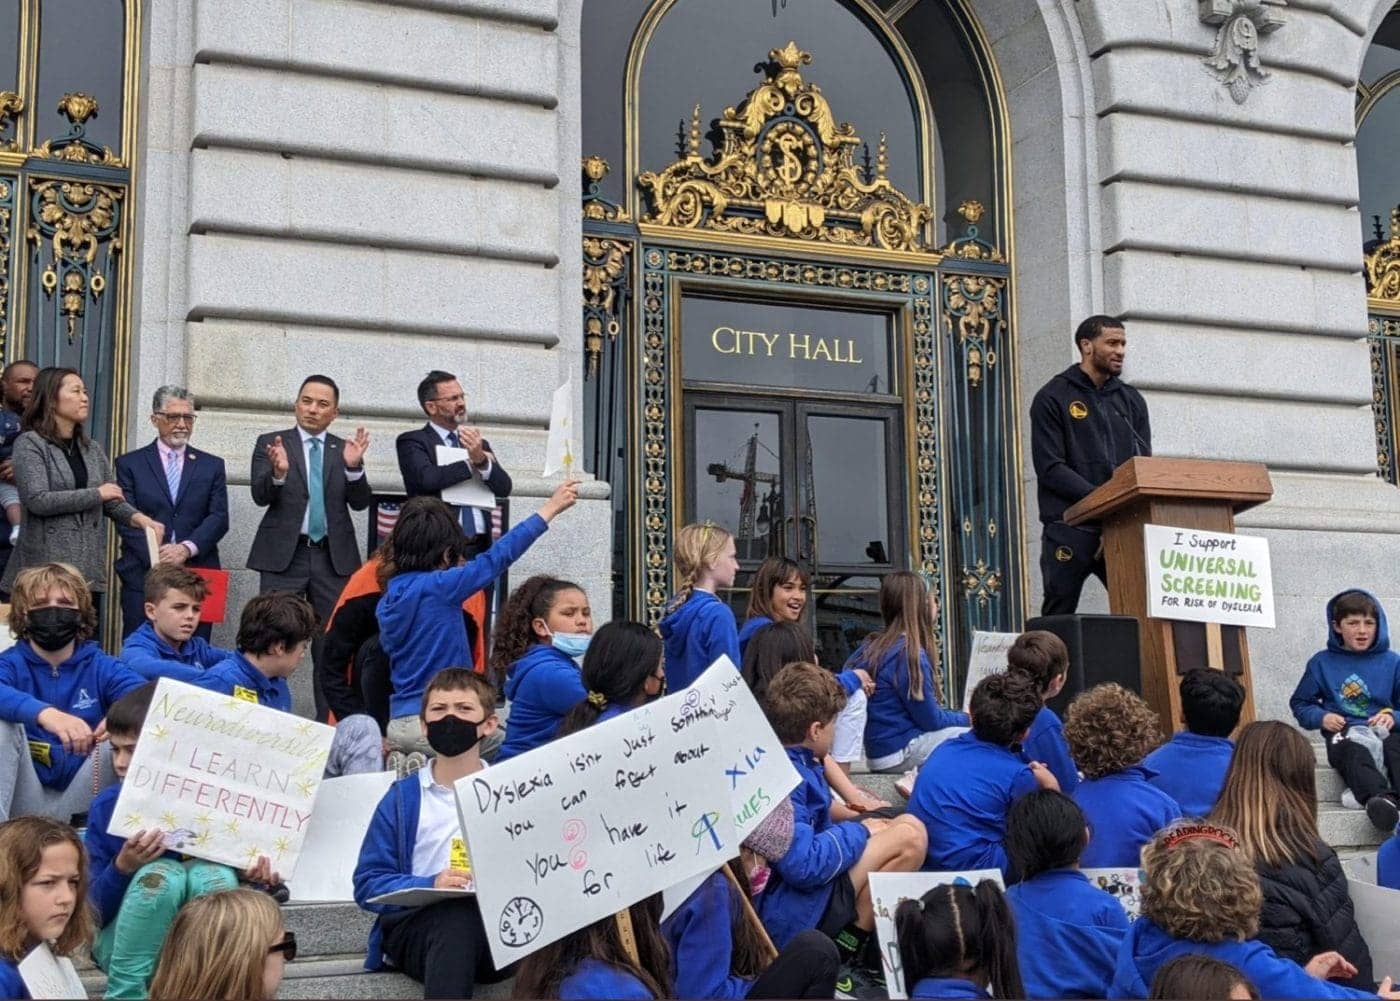 Golden-State-Warriors-guard-Gary-Payton-II-speaking-at-Decoding-Dyslexia-CA-rally-in-San-Francisco-at-City-Hall-by-@DDCalifornia-032922-1400x1001, Golden State Warriors guard rallies for dyslexia screenings, Culture Currents News & Views 